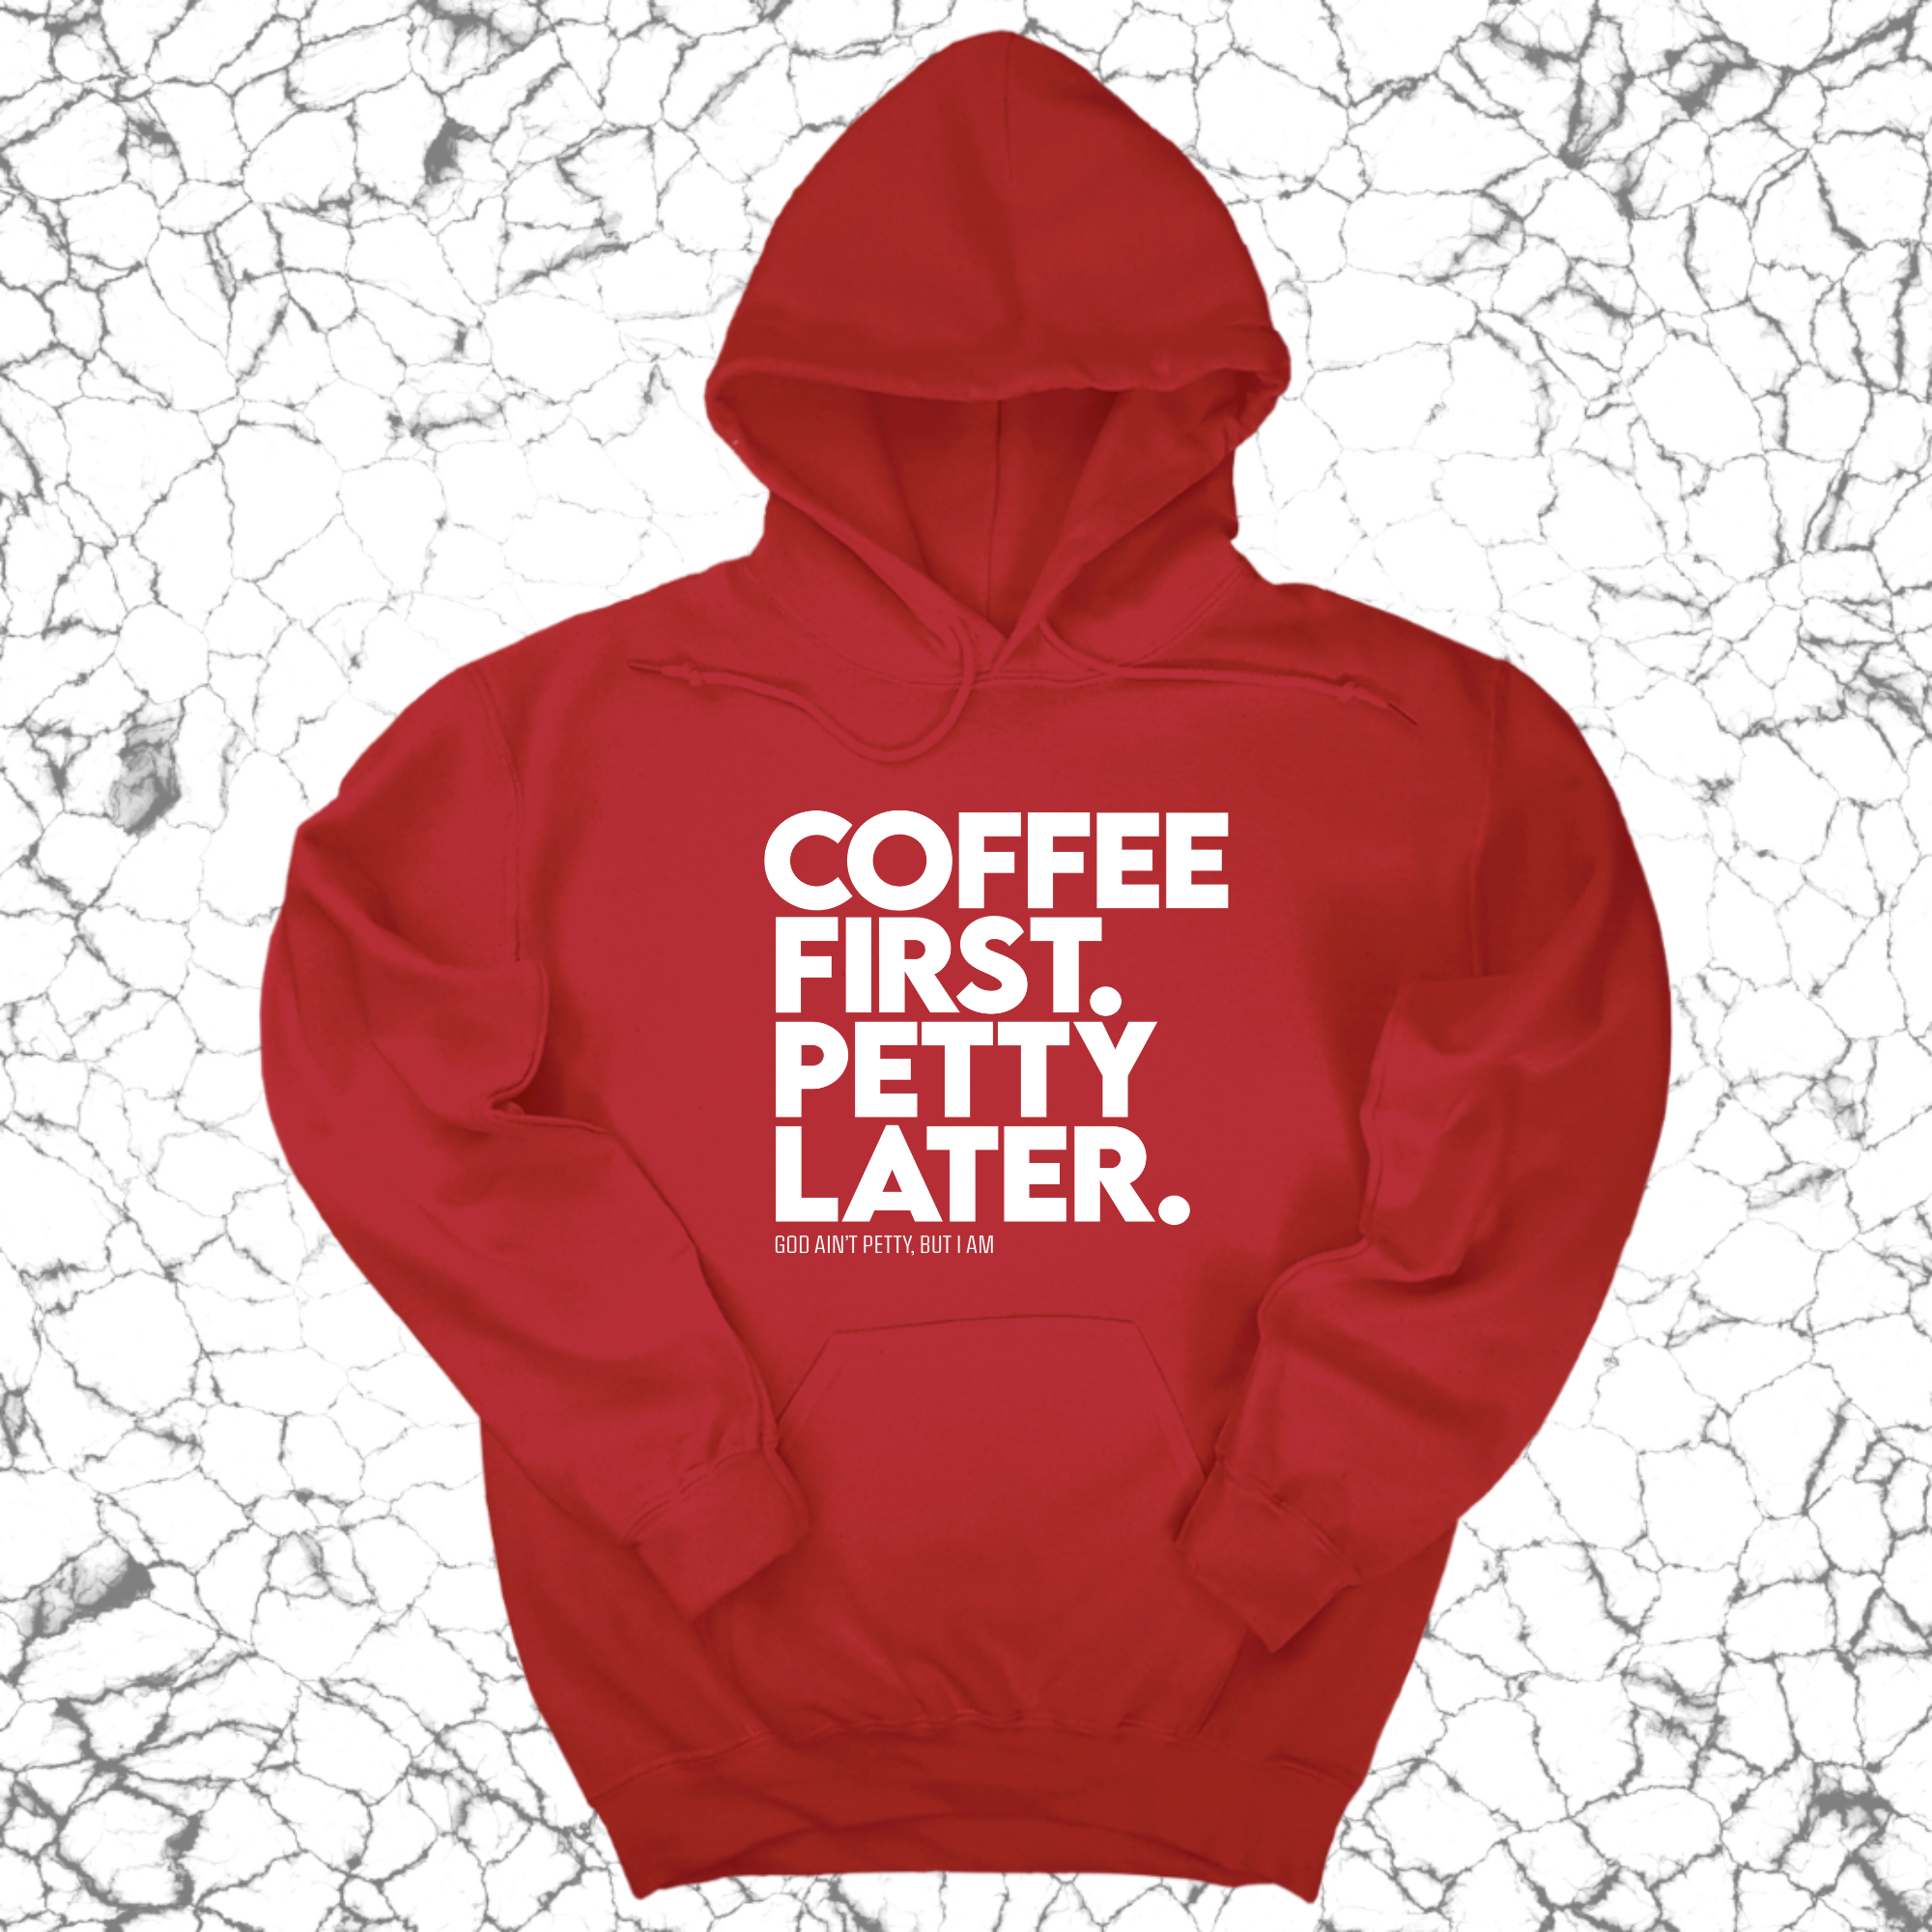 Coffee First Petty Later Unisex Hoodie-Hoodie-The Original God Ain't Petty But I Am